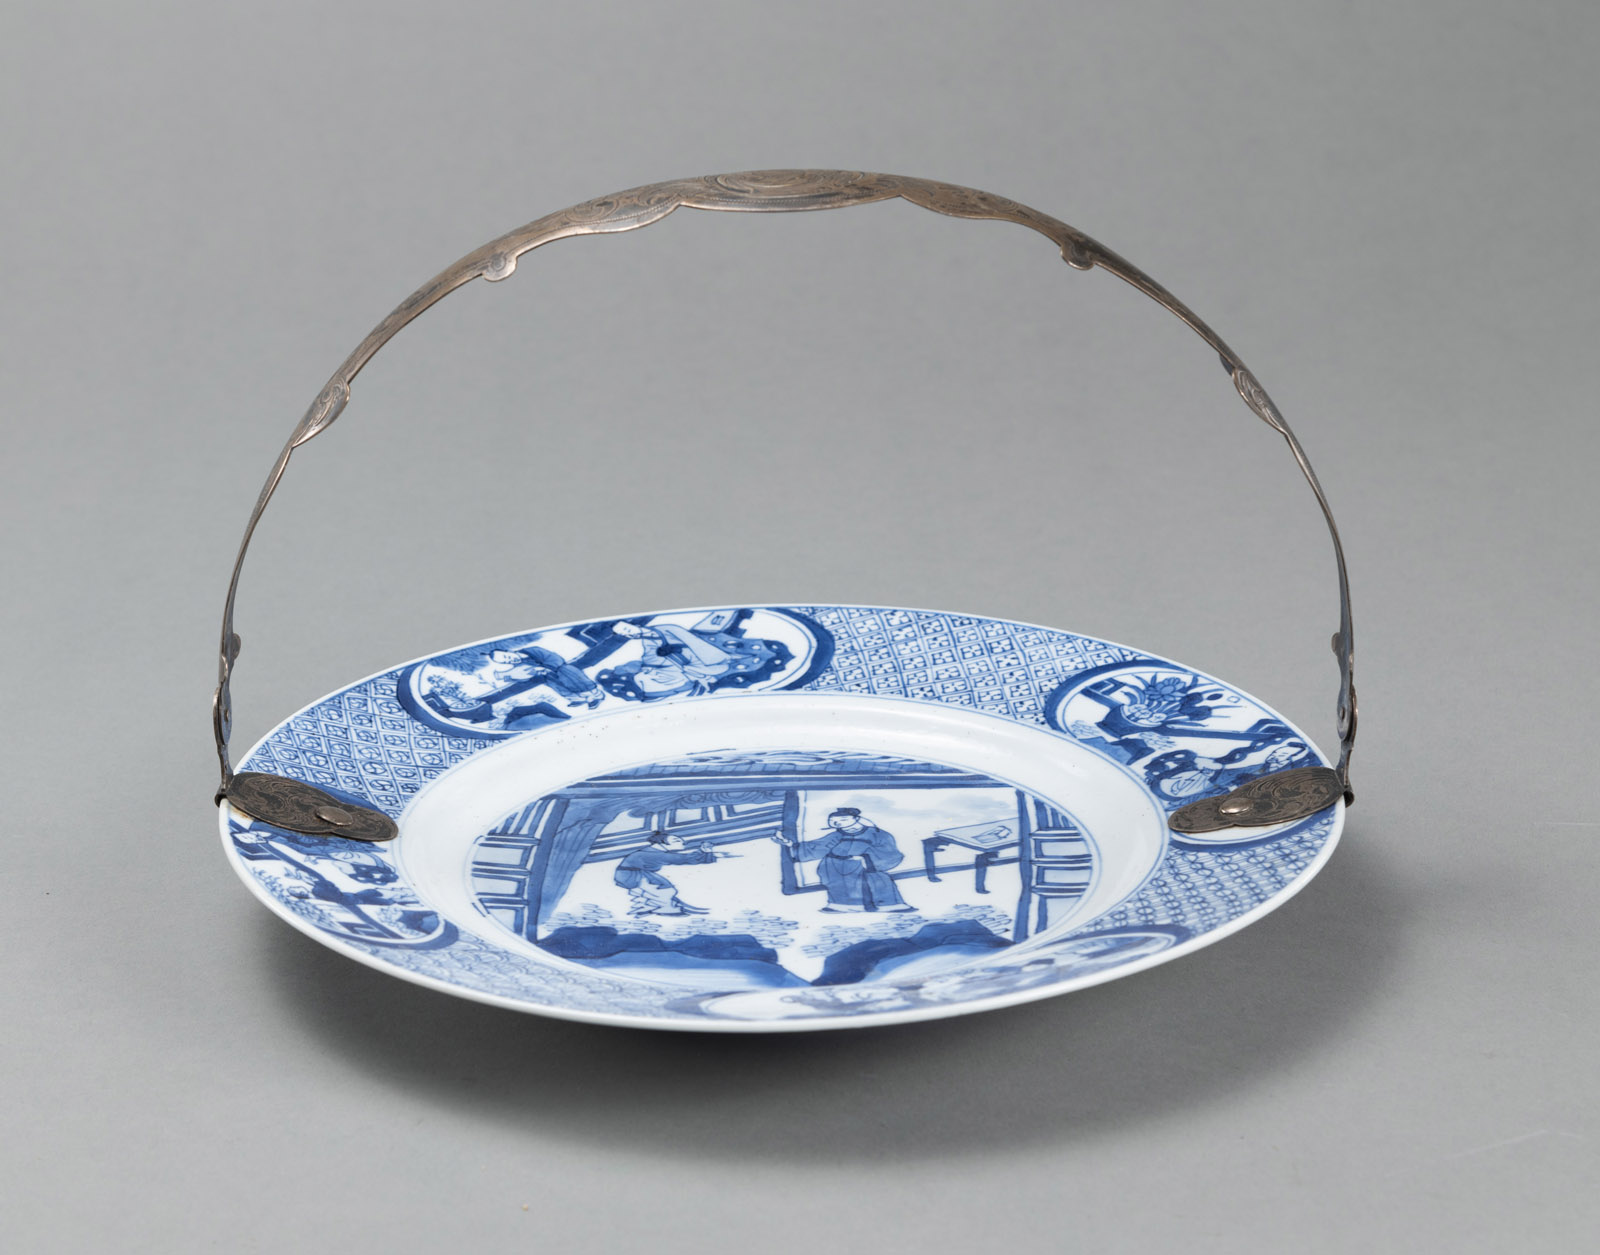 <b>A BLUE AND WHITE DISH WITH FIGURAL DECORATION AND A LATER MOUNTED EUROPEAN SILVER HANDLE</b>